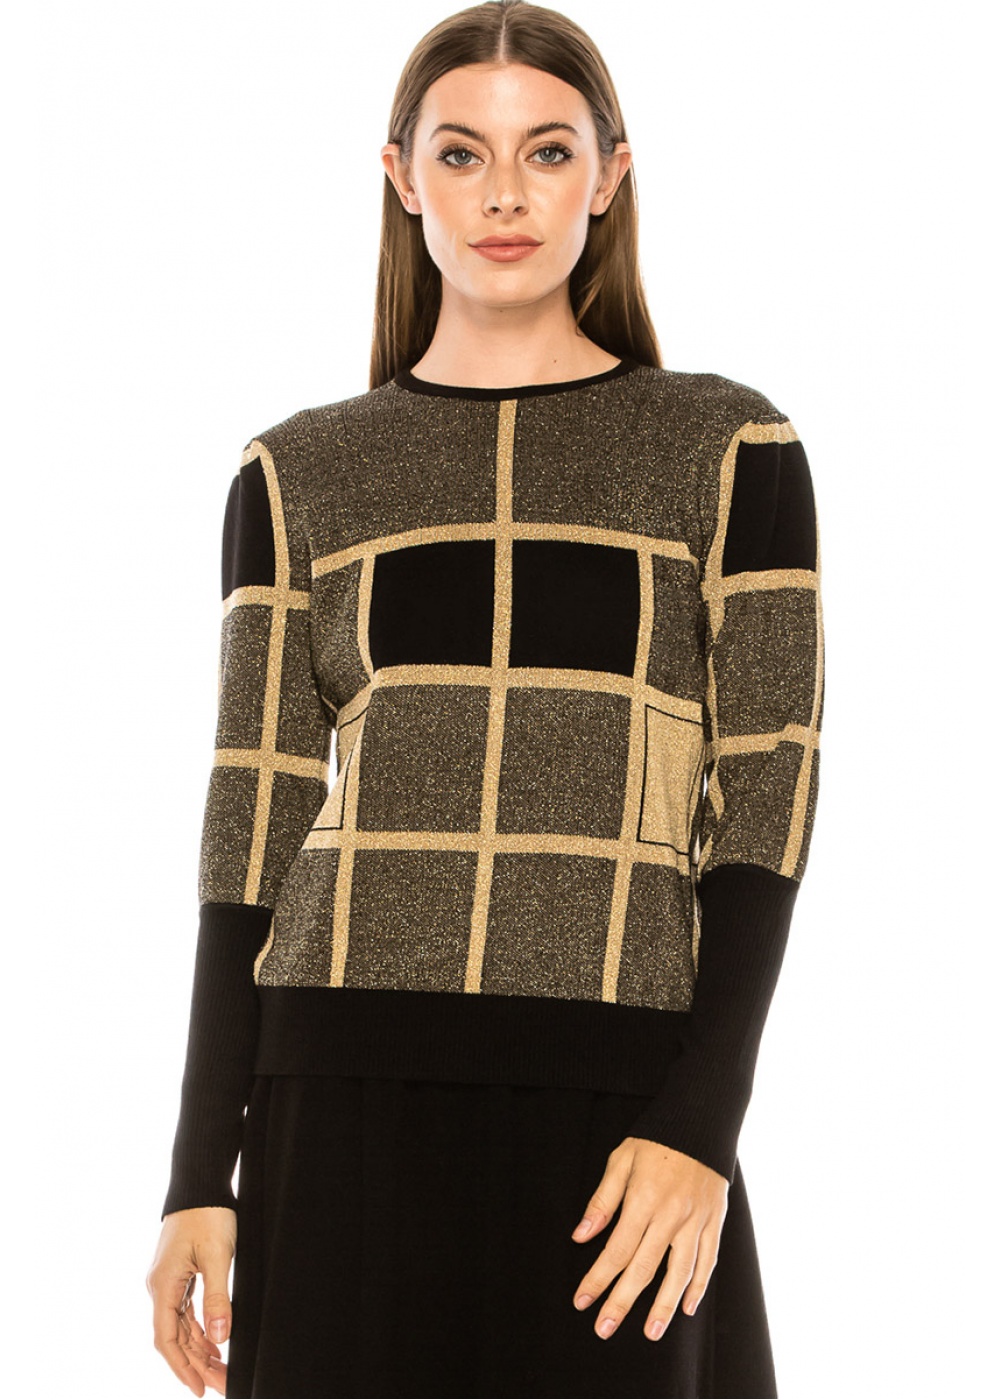 Plaid golden sweater with voluminous sleeves